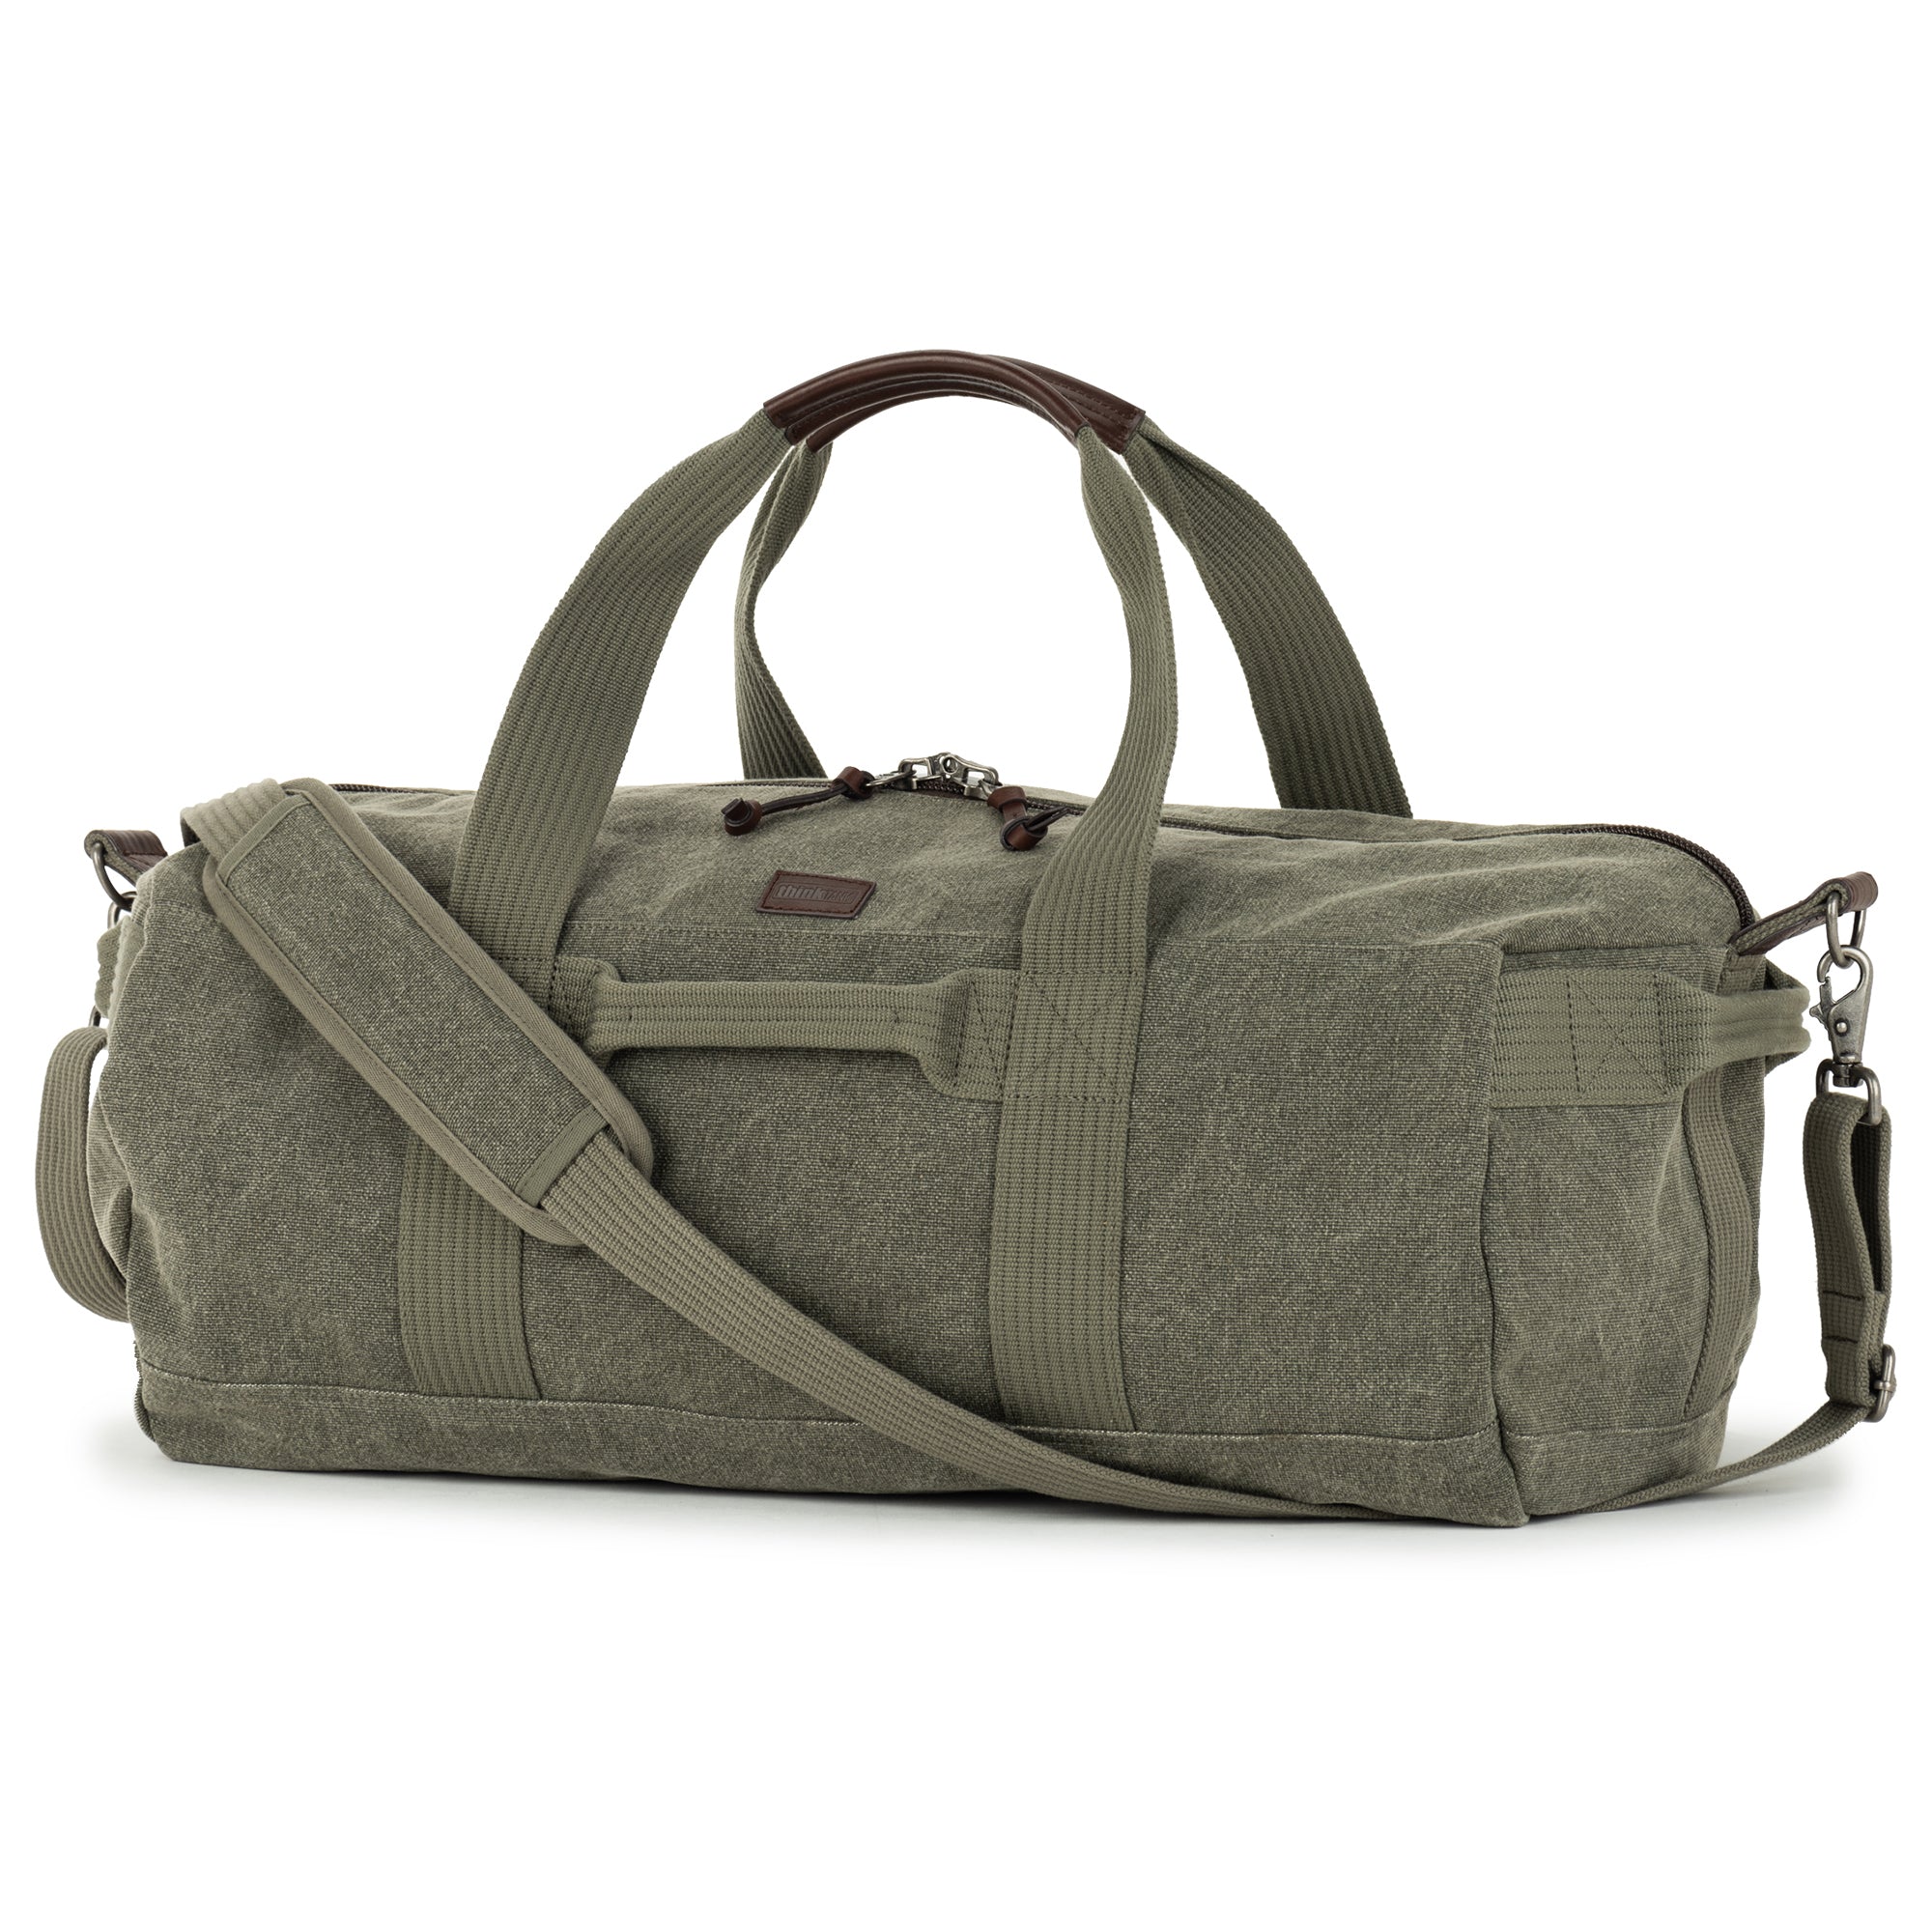 Retrospective® 50 Duffel Bag for travel, sports, and adventure